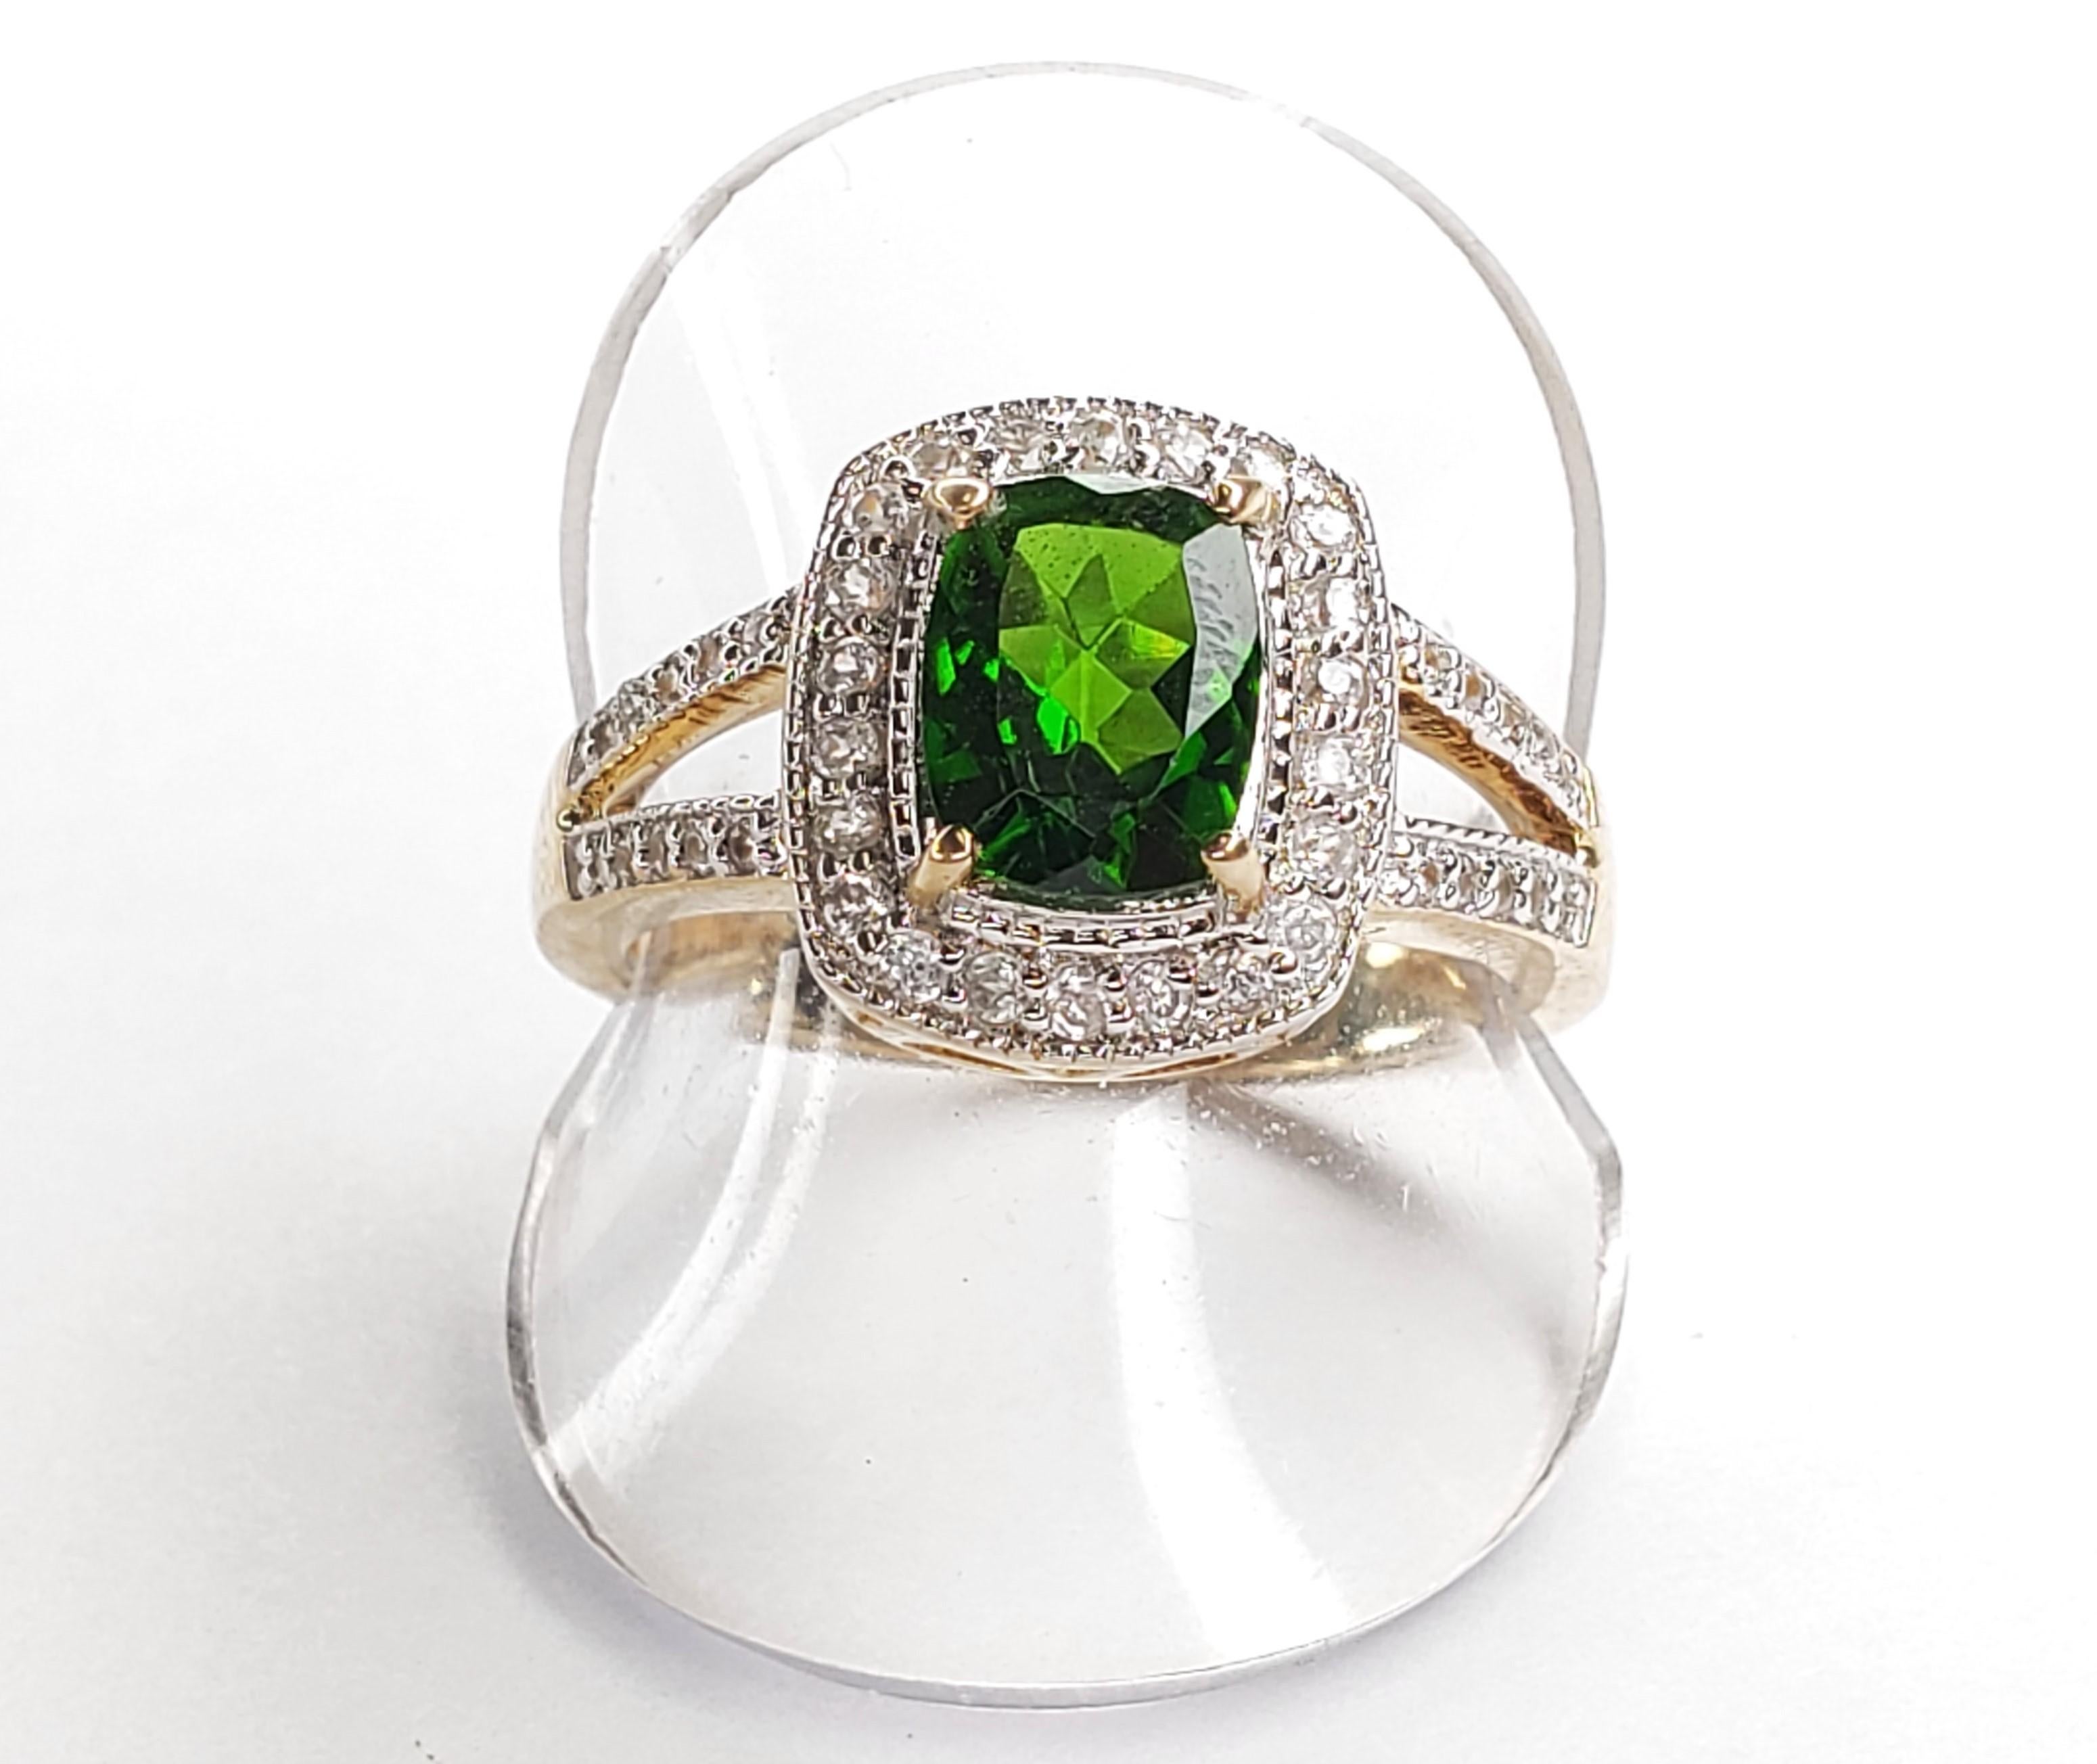 2.07cttw Chrome and White Zircon Sterling Silver Ring - Size 7 

1    Chrome-Diopside Cushion - 1.60cttw
22 Natural White Zircon Round - 0.33cttw
20 Natural White Zircon Round - 0.14cttw 

.925 Sterling Silver w/ 14K Yellow Gold Plated Finish 

US